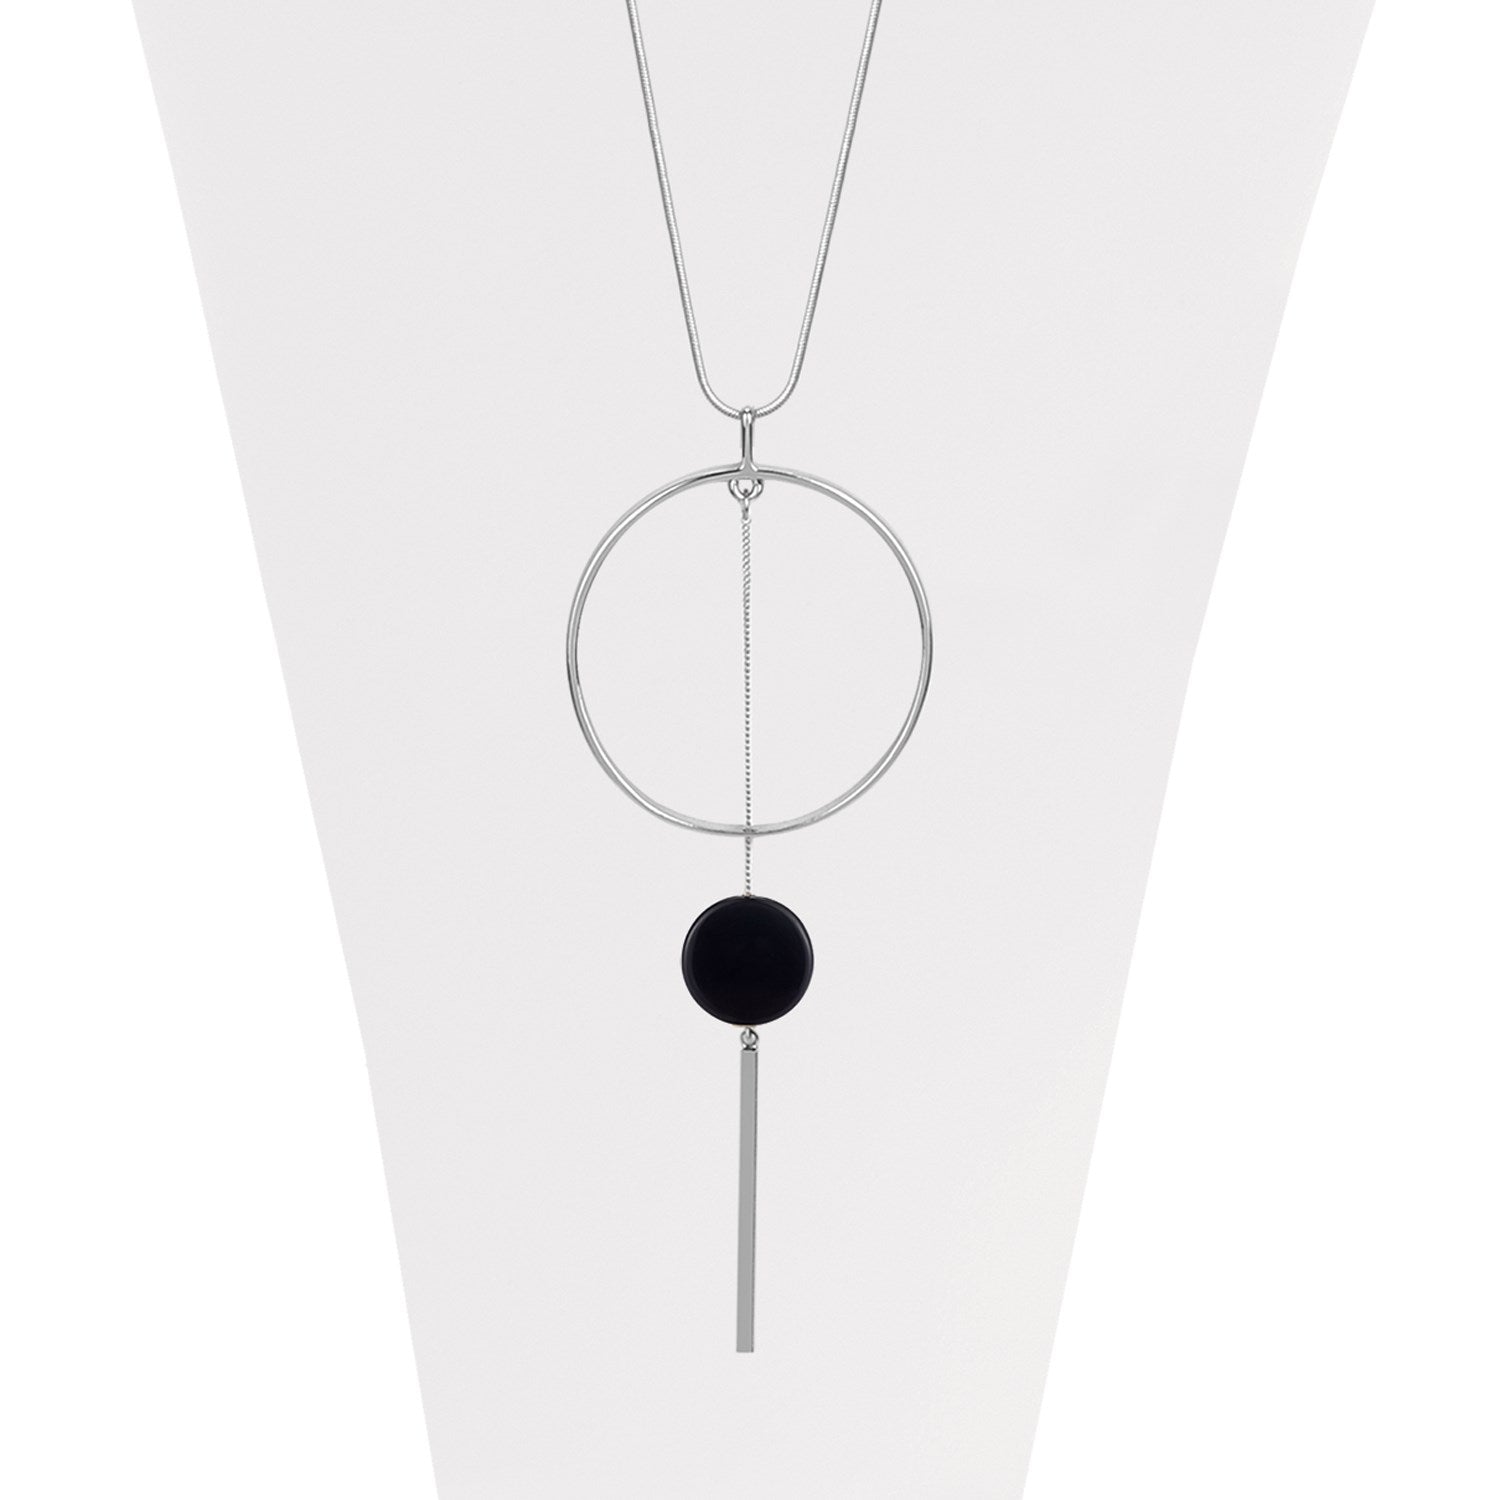 Silver adjustable necklace with thin ring, stick and black dot pendants